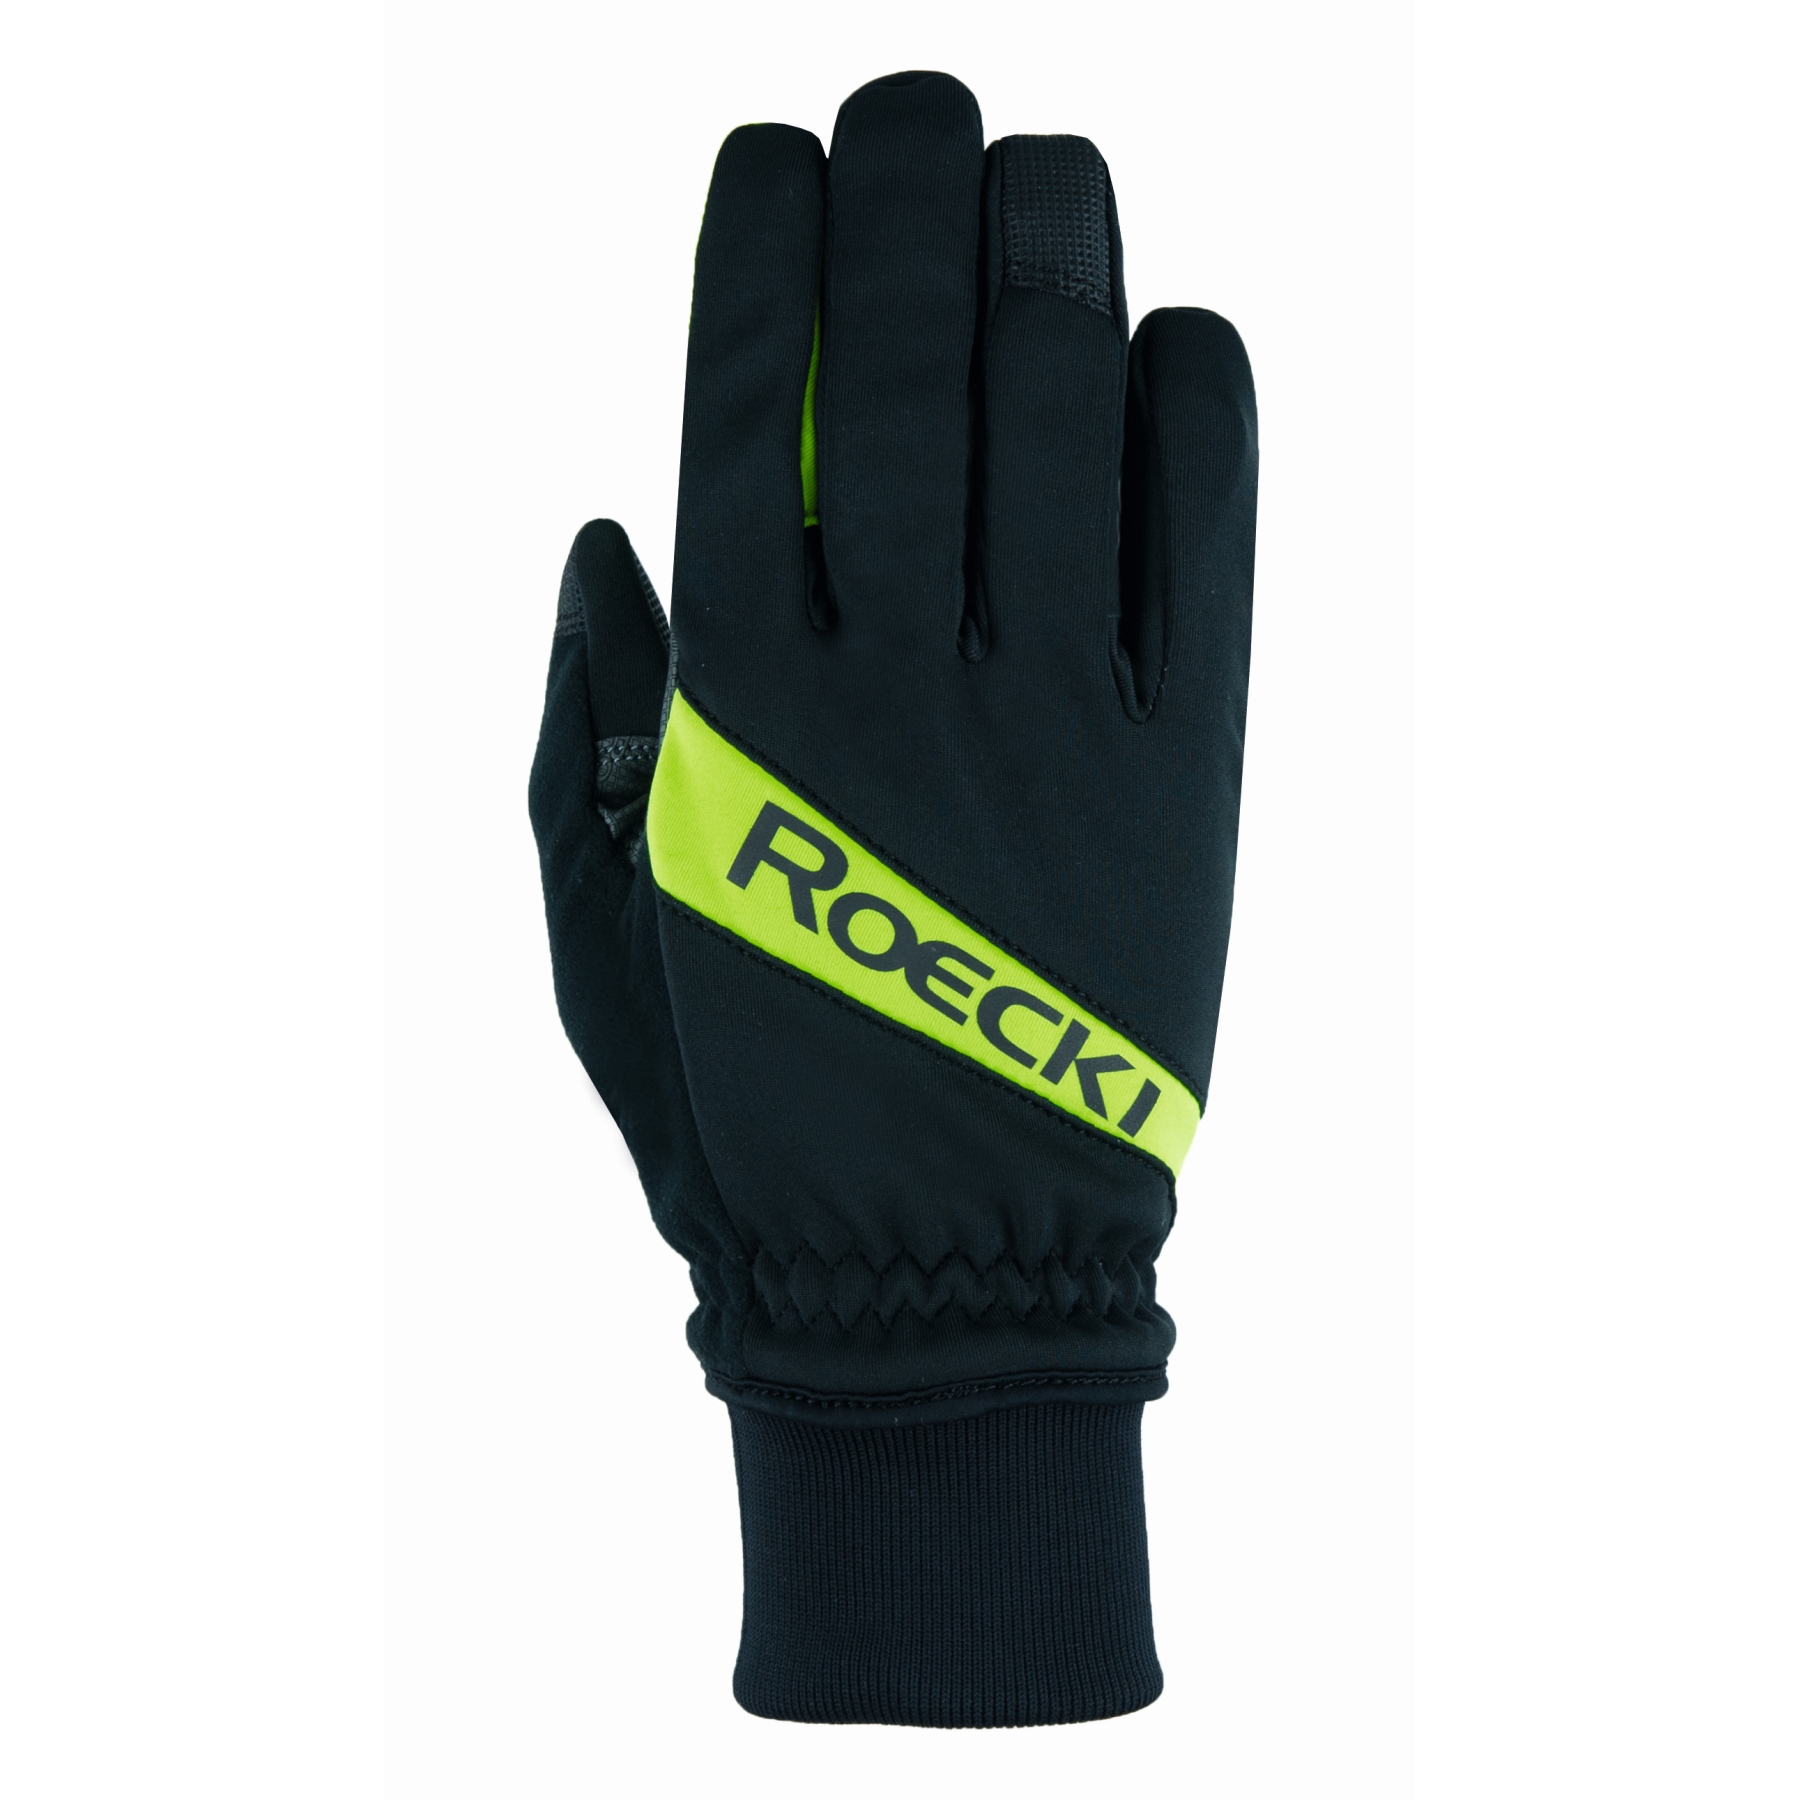 Picture of Roeckl Sports Rofan Cycling Gloves - black/yellow 0002